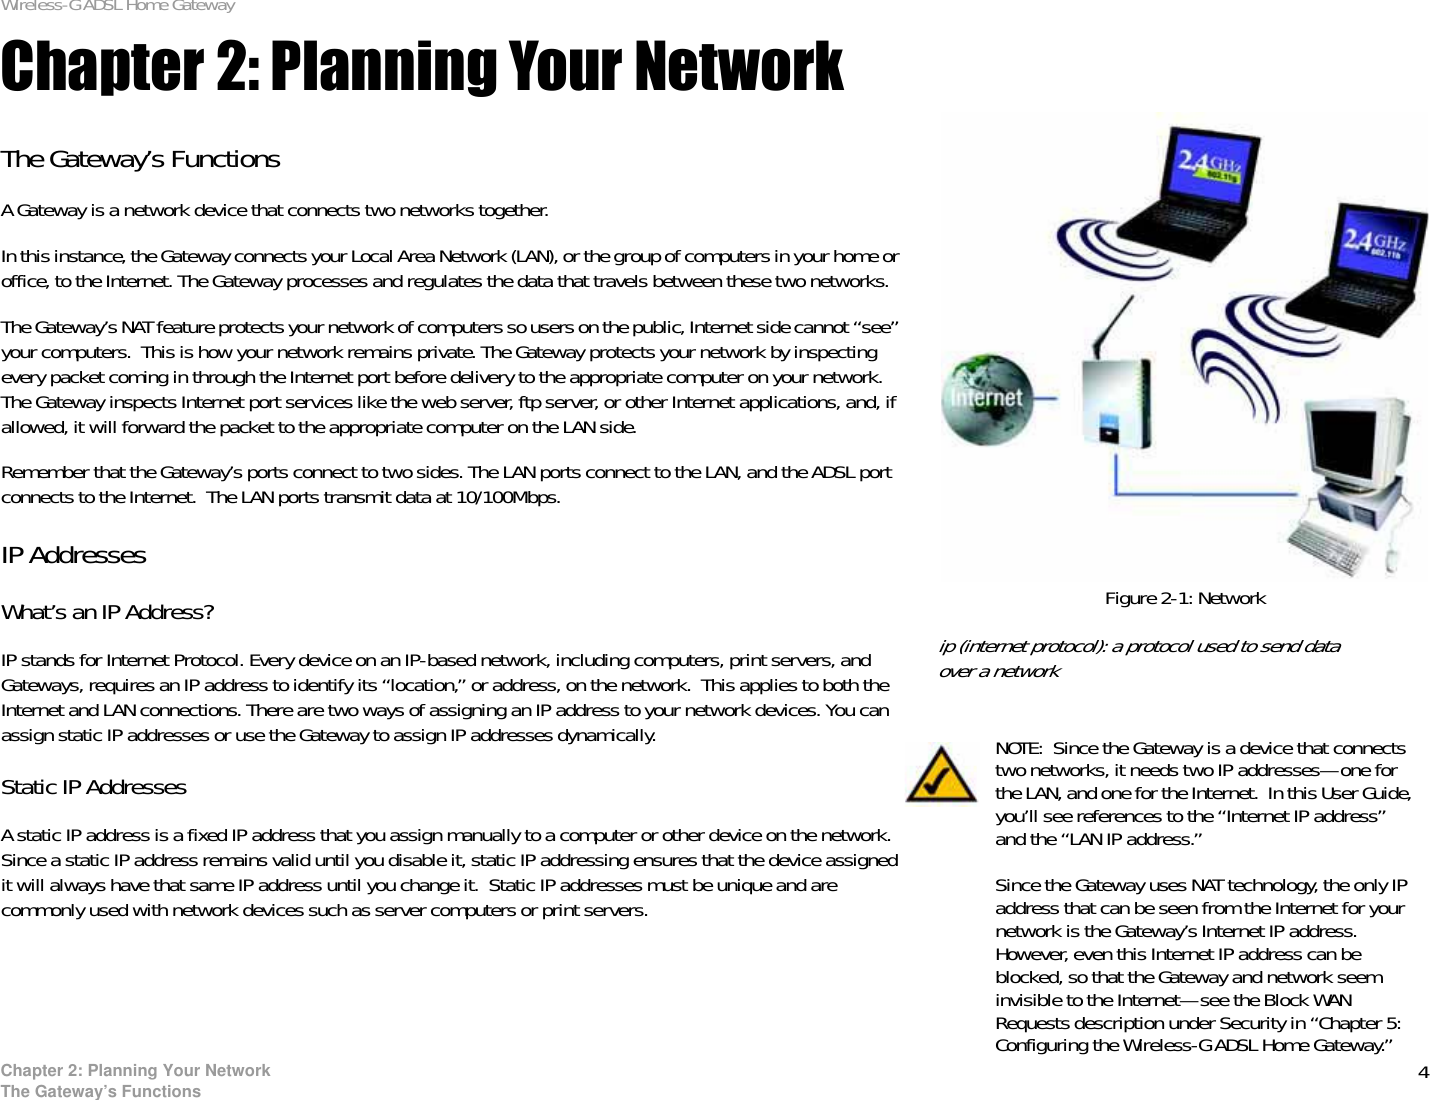 4Chapter 2: Planning Your NetworkThe Gateway’s FunctionsWireless-G ADSL Home GatewayChapter 2: Planning Your NetworkThe Gateway’s FunctionsA Gateway is a network device that connects two networks together. In this instance, the Gateway connects your Local Area Network (LAN), or the group of computers in your home or office, to the Internet. The Gateway processes and regulates the data that travels between these two networks.The Gateway’s NAT feature protects your network of computers so users on the public, Internet side cannot “see” your computers.  This is how your network remains private. The Gateway protects your network by inspecting every packet coming in through the Internet port before delivery to the appropriate computer on your network. The Gateway inspects Internet port services like the web server, ftp server, or other Internet applications, and, if allowed, it will forward the packet to the appropriate computer on the LAN side.Remember that the Gateway’s ports connect to two sides. The LAN ports connect to the LAN, and the ADSL port connects to the Internet.  The LAN ports transmit data at 10/100Mbps.IP AddressesWhat’s an IP Address?IP stands for Internet Protocol. Every device on an IP-based network, including computers, print servers, and Gateways, requires an IP address to identify its “location,” or address, on the network.  This applies to both the Internet and LAN connections. There are two ways of assigning an IP address to your network devices. You can assign static IP addresses or use the Gateway to assign IP addresses dynamically.Static IP Addresses  A static IP address is a fixed IP address that you assign manually to a computer or other device on the network.  Since a static IP address remains valid until you disable it, static IP addressing ensures that the device assigned it will always have that same IP address until you change it.  Static IP addresses must be unique and are commonly used with network devices such as server computers or print servers.NOTE: Since the Gateway is a device that connects two networks, it needs two IP addresses—one for the LAN, and one for the Internet.  In this User Guide, you’ll see references to the “Internet IP address” and the “LAN IP address.”Since the Gateway uses NAT technology, the only IP address that can be seen from the Internet for your network is the Gateway’s Internet IP address. However, even this Internet IP address can be blocked, so that the Gateway and network seem invisible to the Internet—see the Block WAN Requests description under Security in “Chapter 5: Configuring the Wireless-G ADSL Home Gateway.”Figure 2-1: Networkip (internet protocol): a protocol used to send data over a network